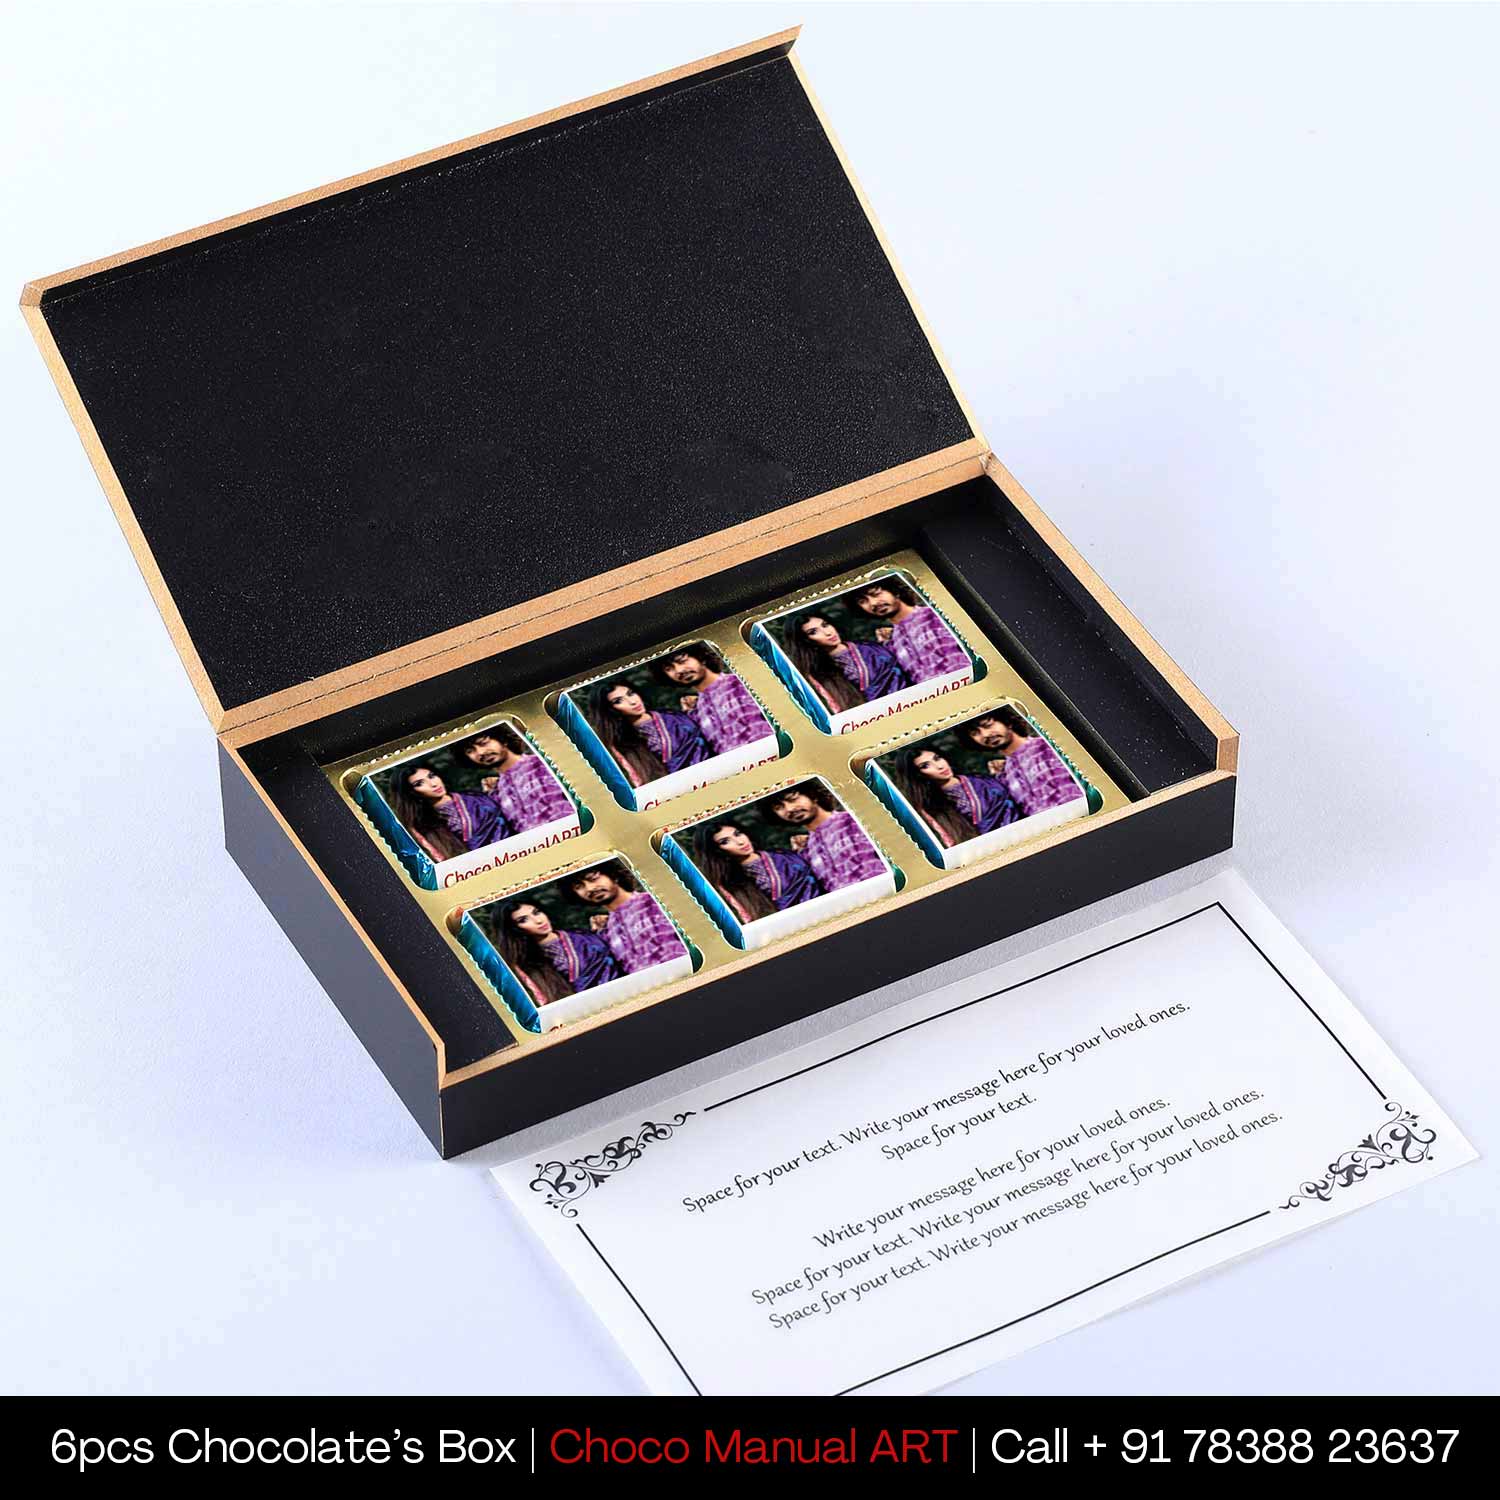 Best unique gifts for Anniversary I Buy Image Printed Chocolates Online